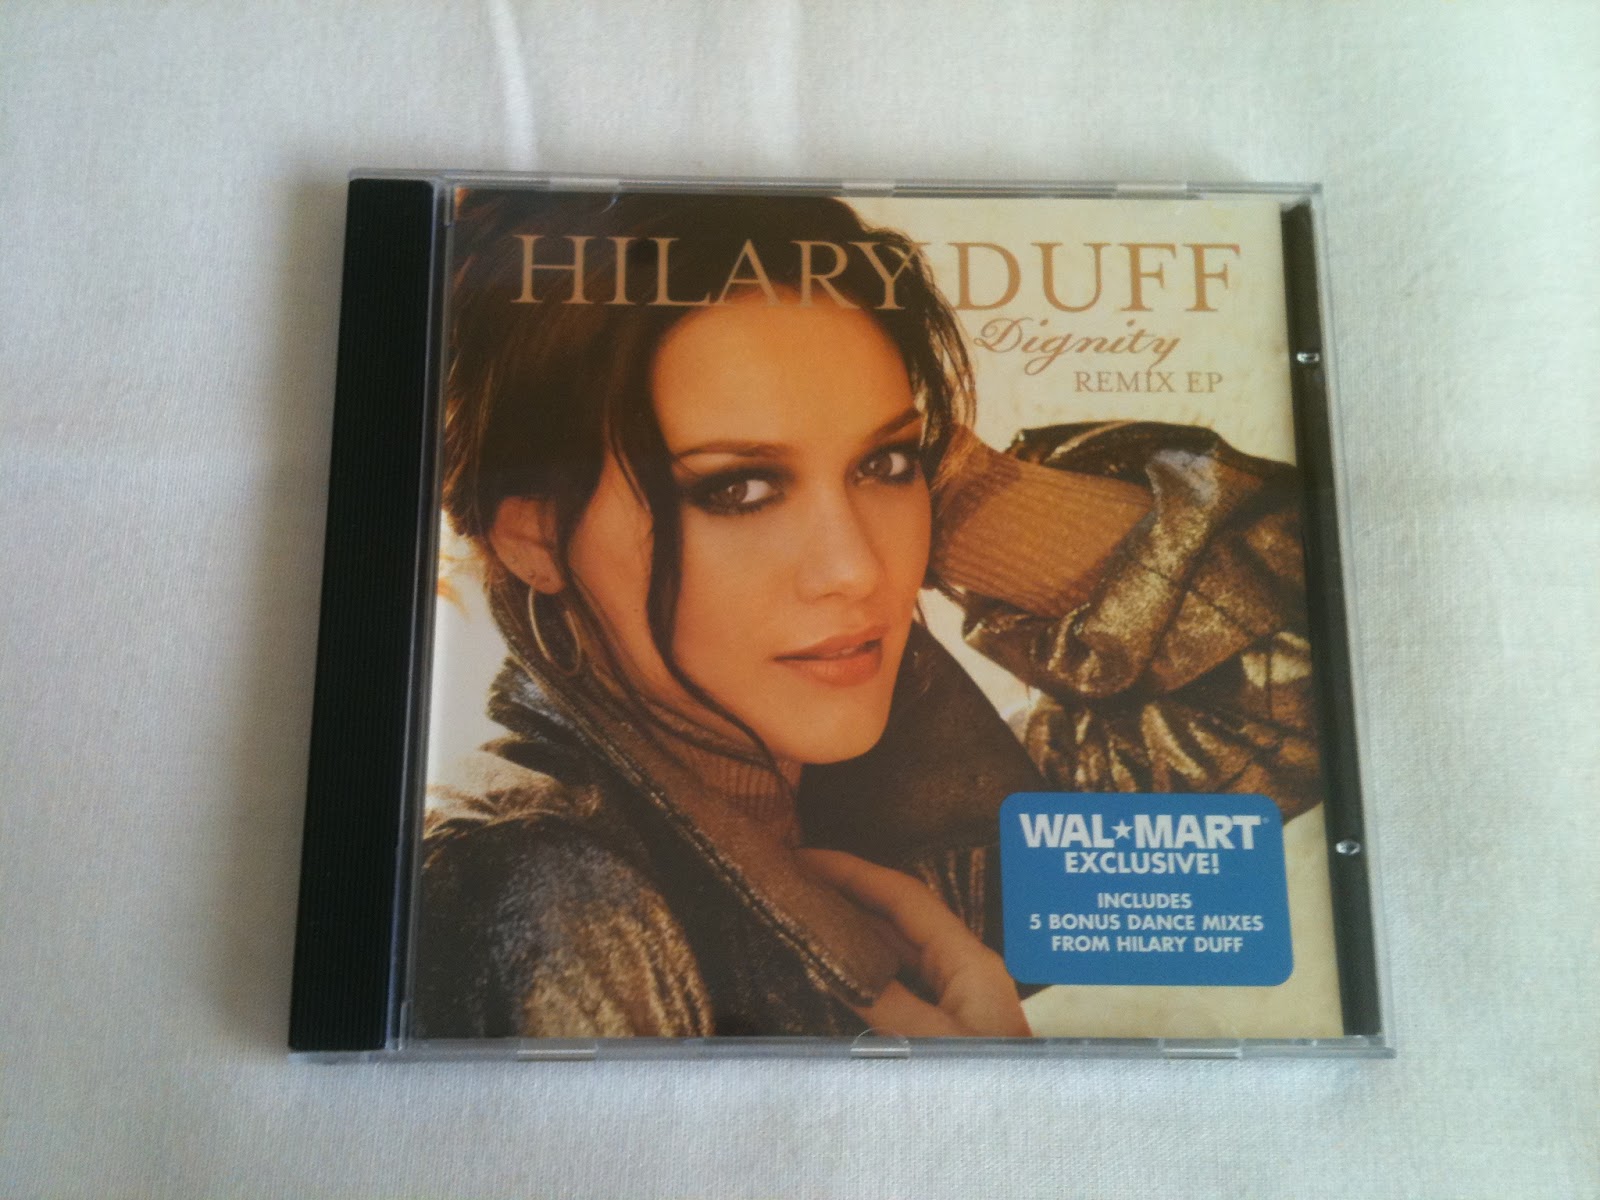 ## Cds Collection ##: Hilary Duff - Dignity (Remix EP) [US]